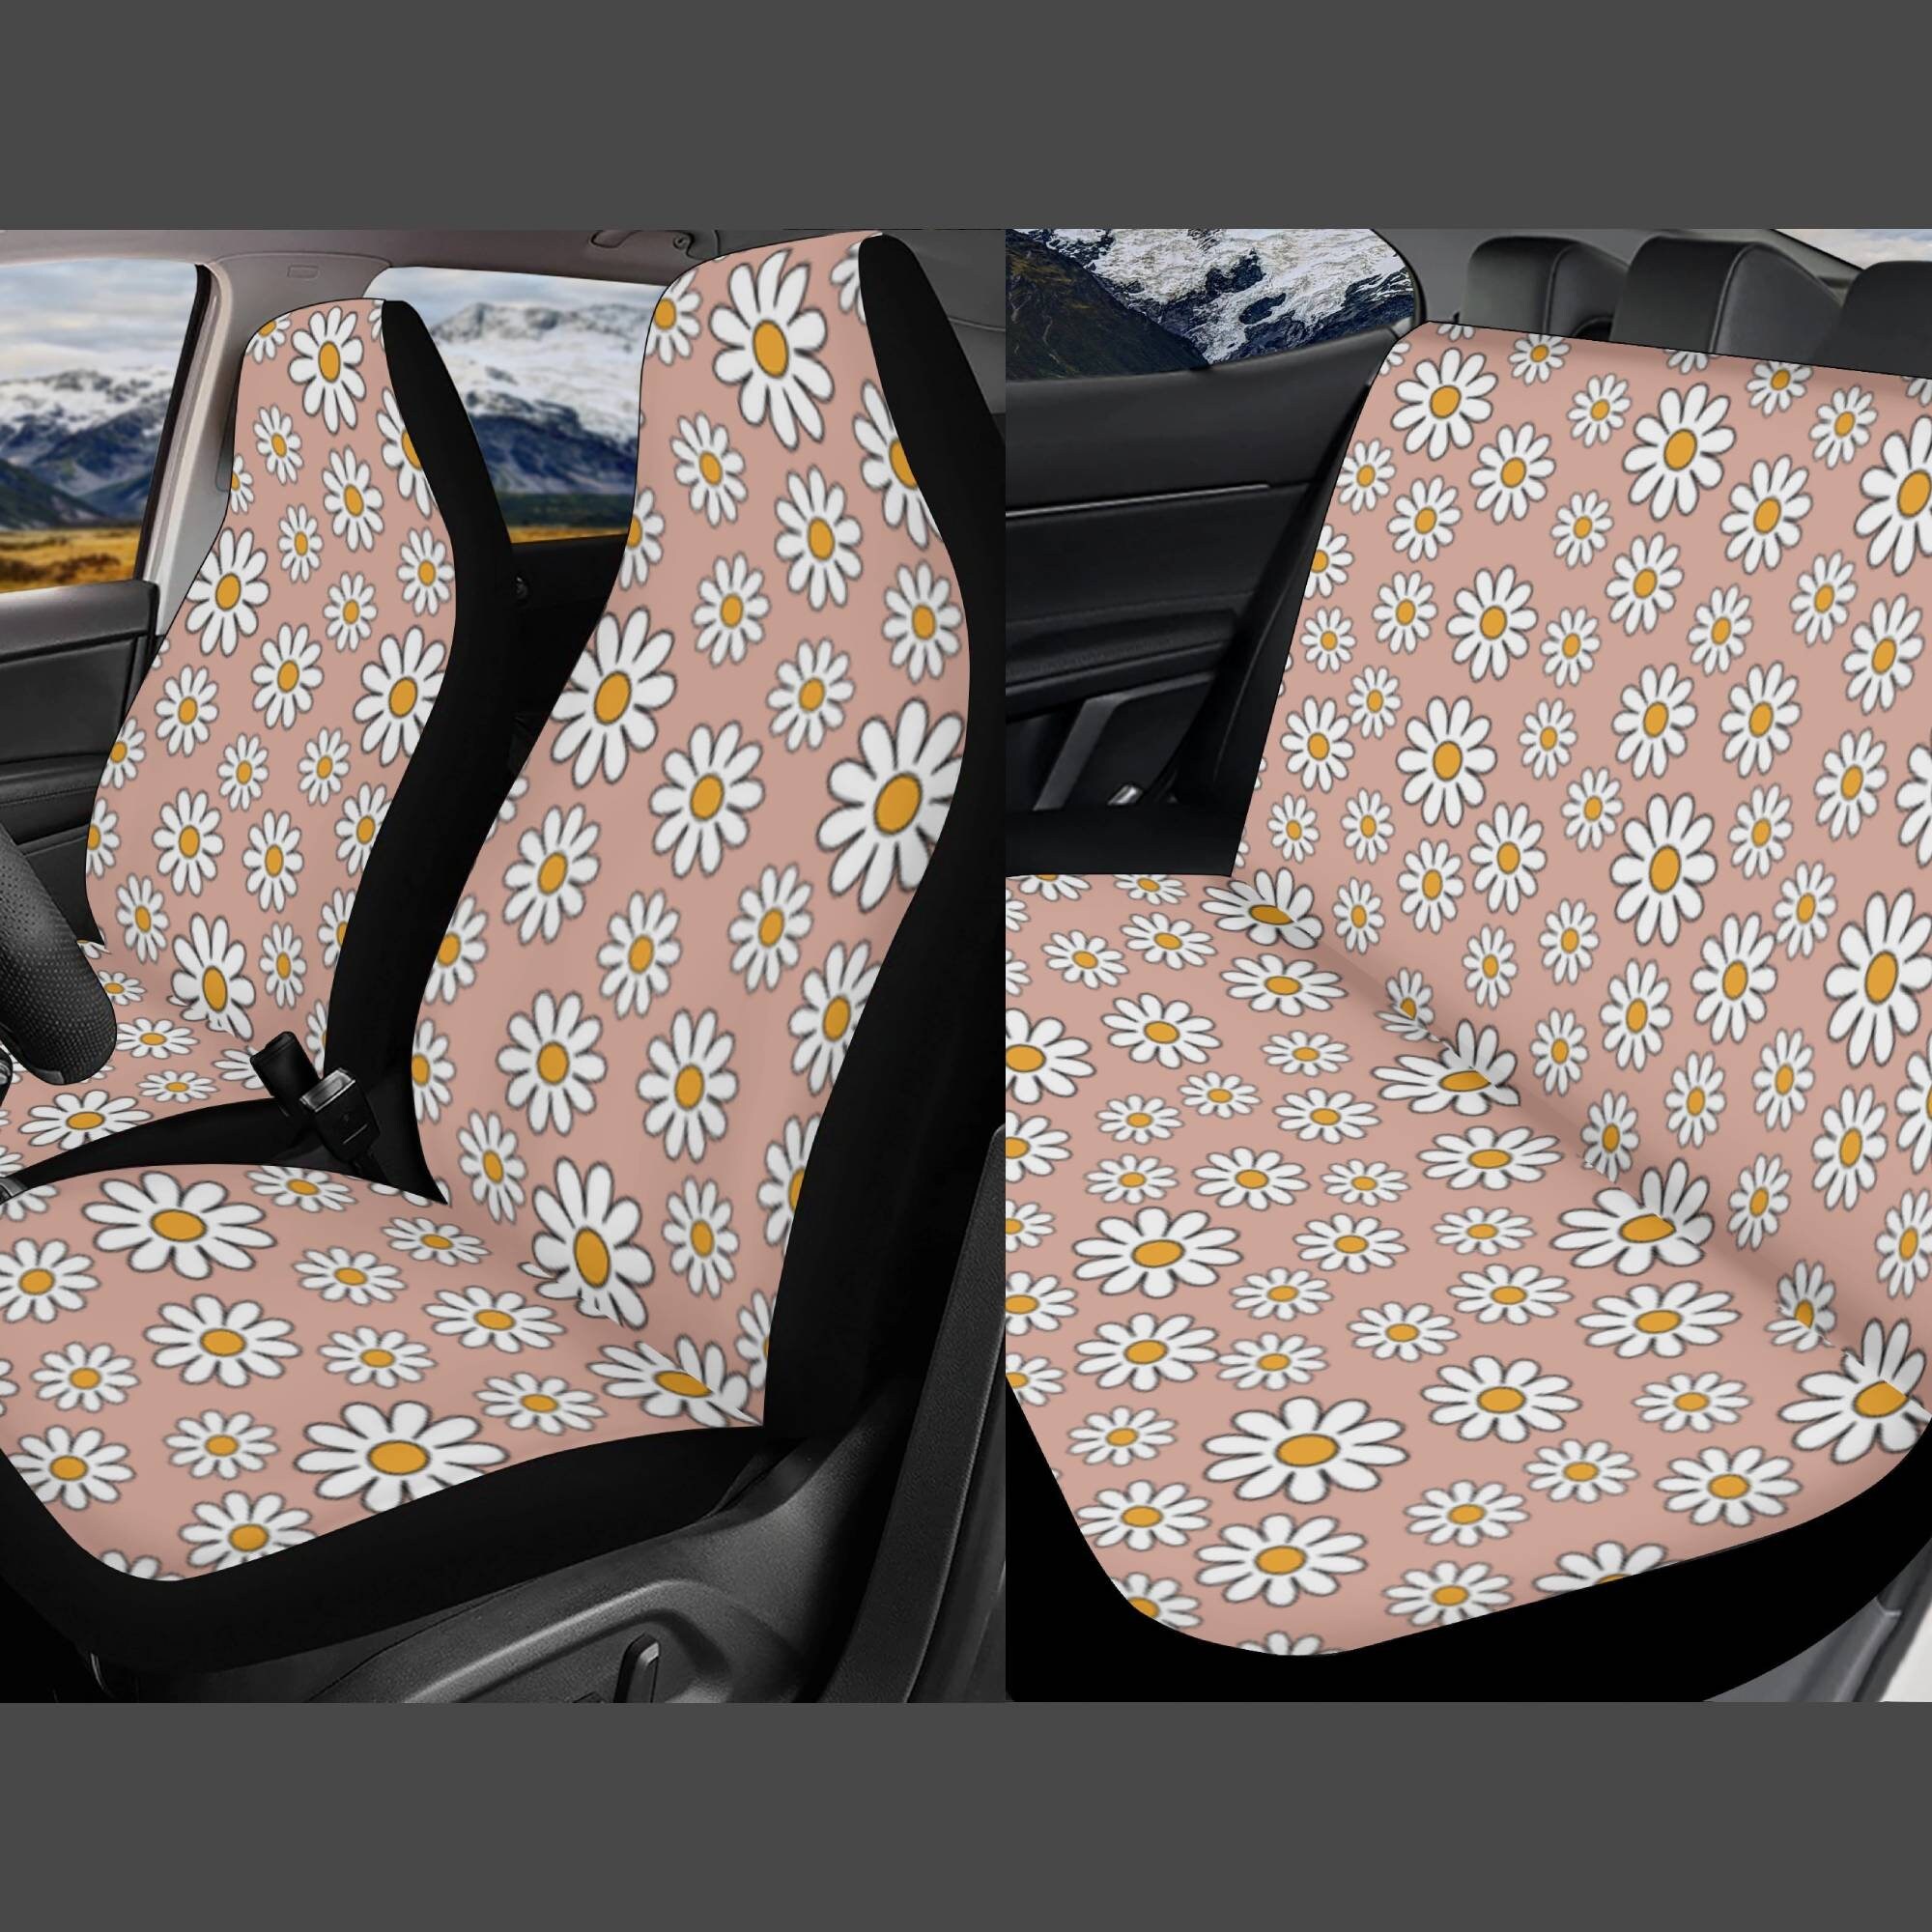 Chevy Seat Covers Etsy Canada